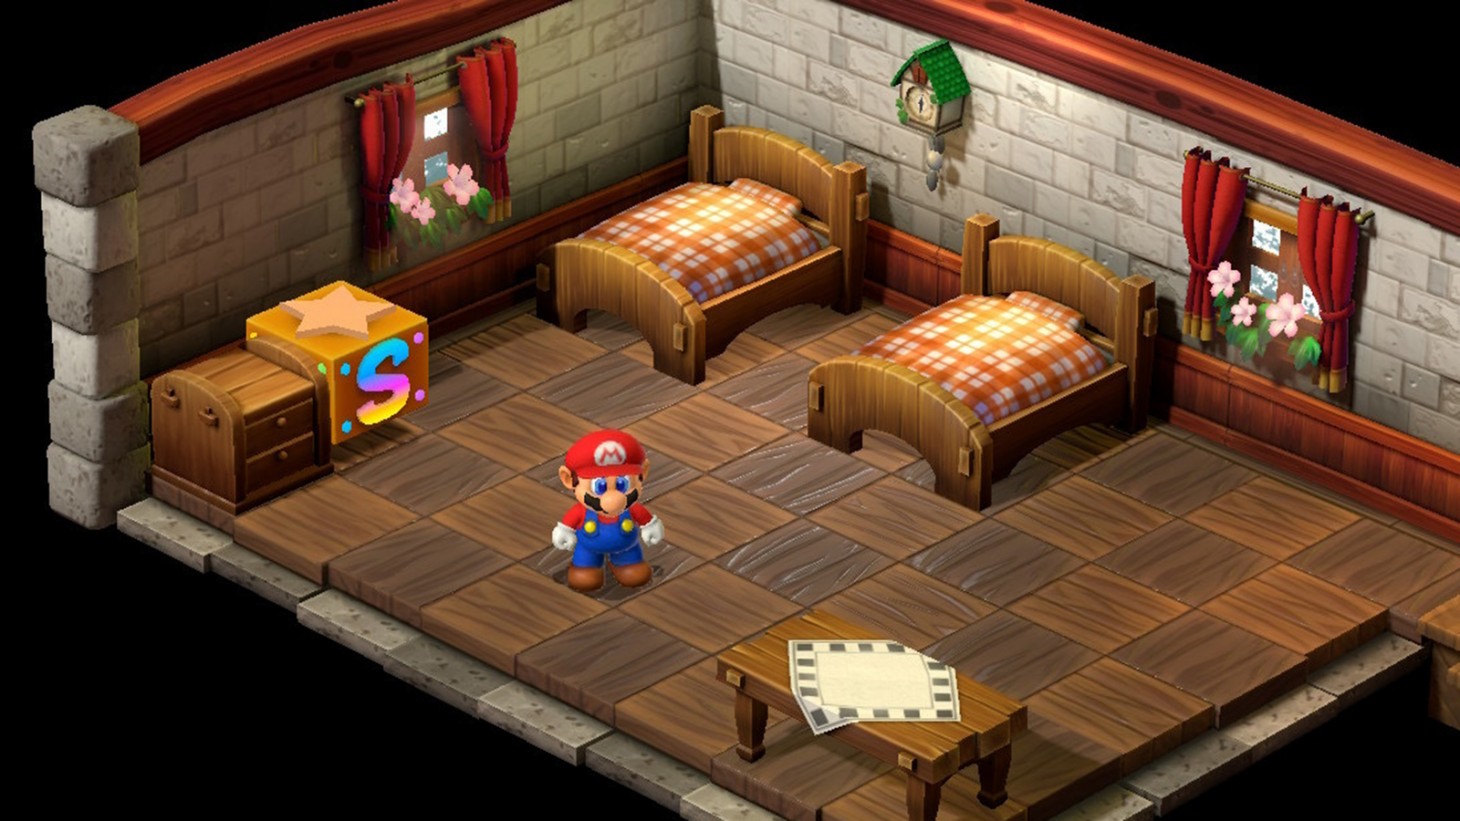 Here's A Look At The Super Mario RPG Remake Gameplay - Game Informer